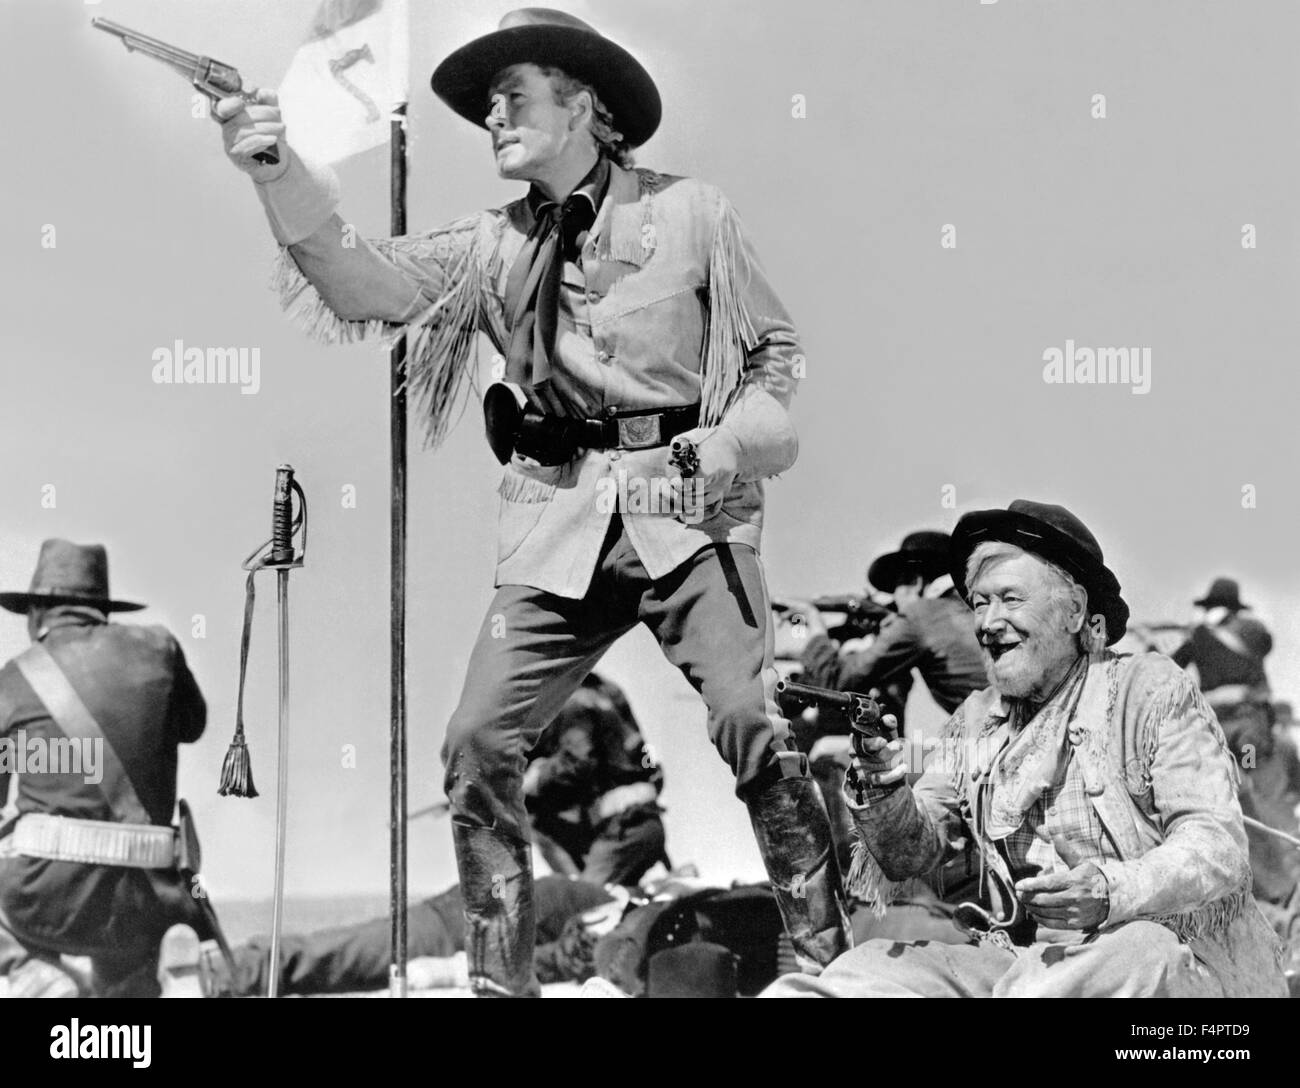 Errol flynn / They Died with Their Boots On / 1941 directed by Raoul Walsh  [Warner Bros. Pictures] Stock Photo - Alamy